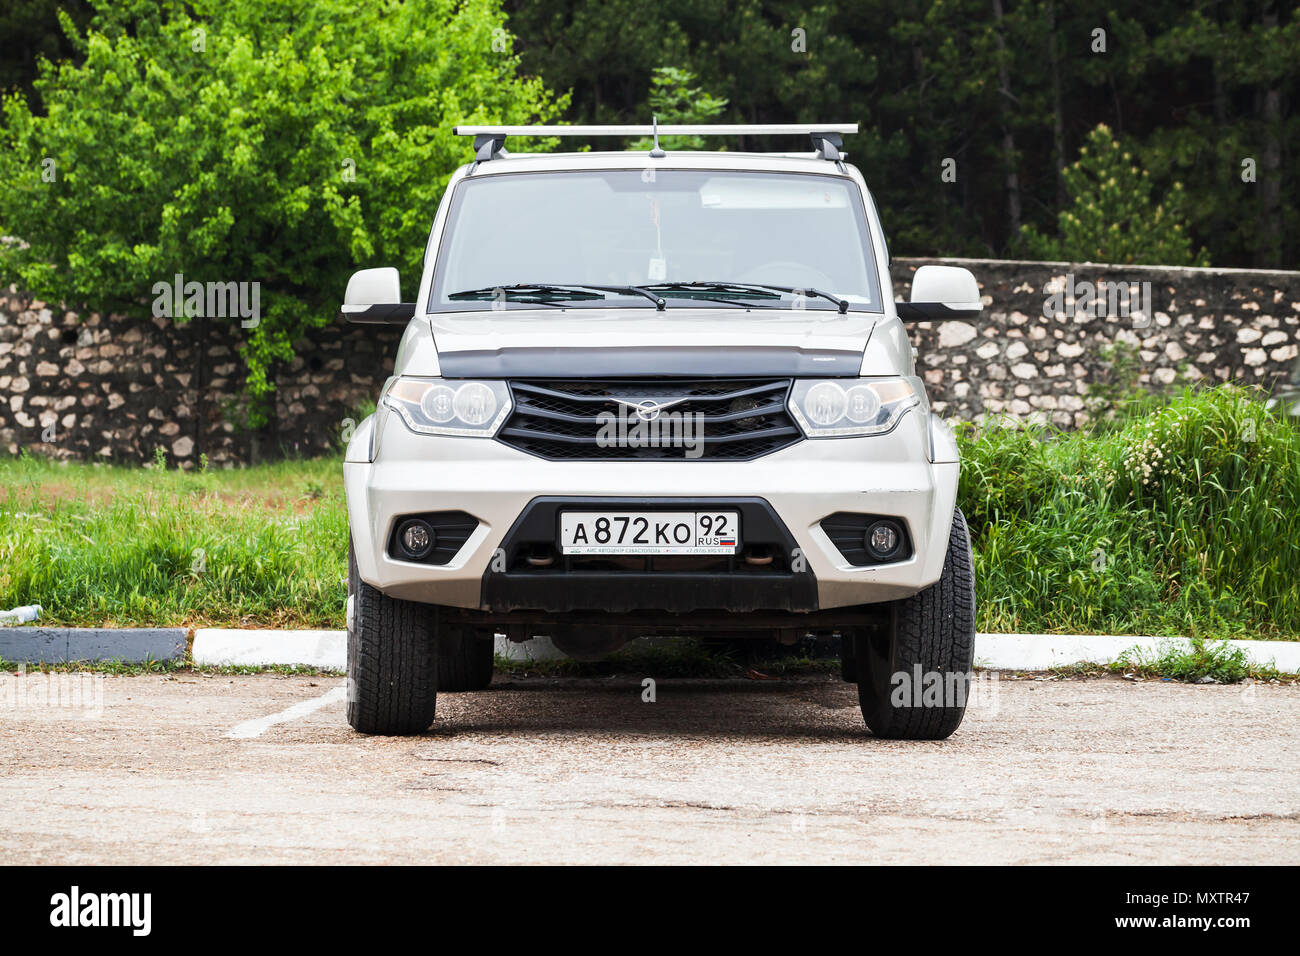 Sevastopol, Crimea - May 8, 2018: Close-up front view of UAZ Patriot or UAZ-3163, mid-size SUV produced by UAZ division of SeverstalAvto in Ulyanovsk, Stock Photo